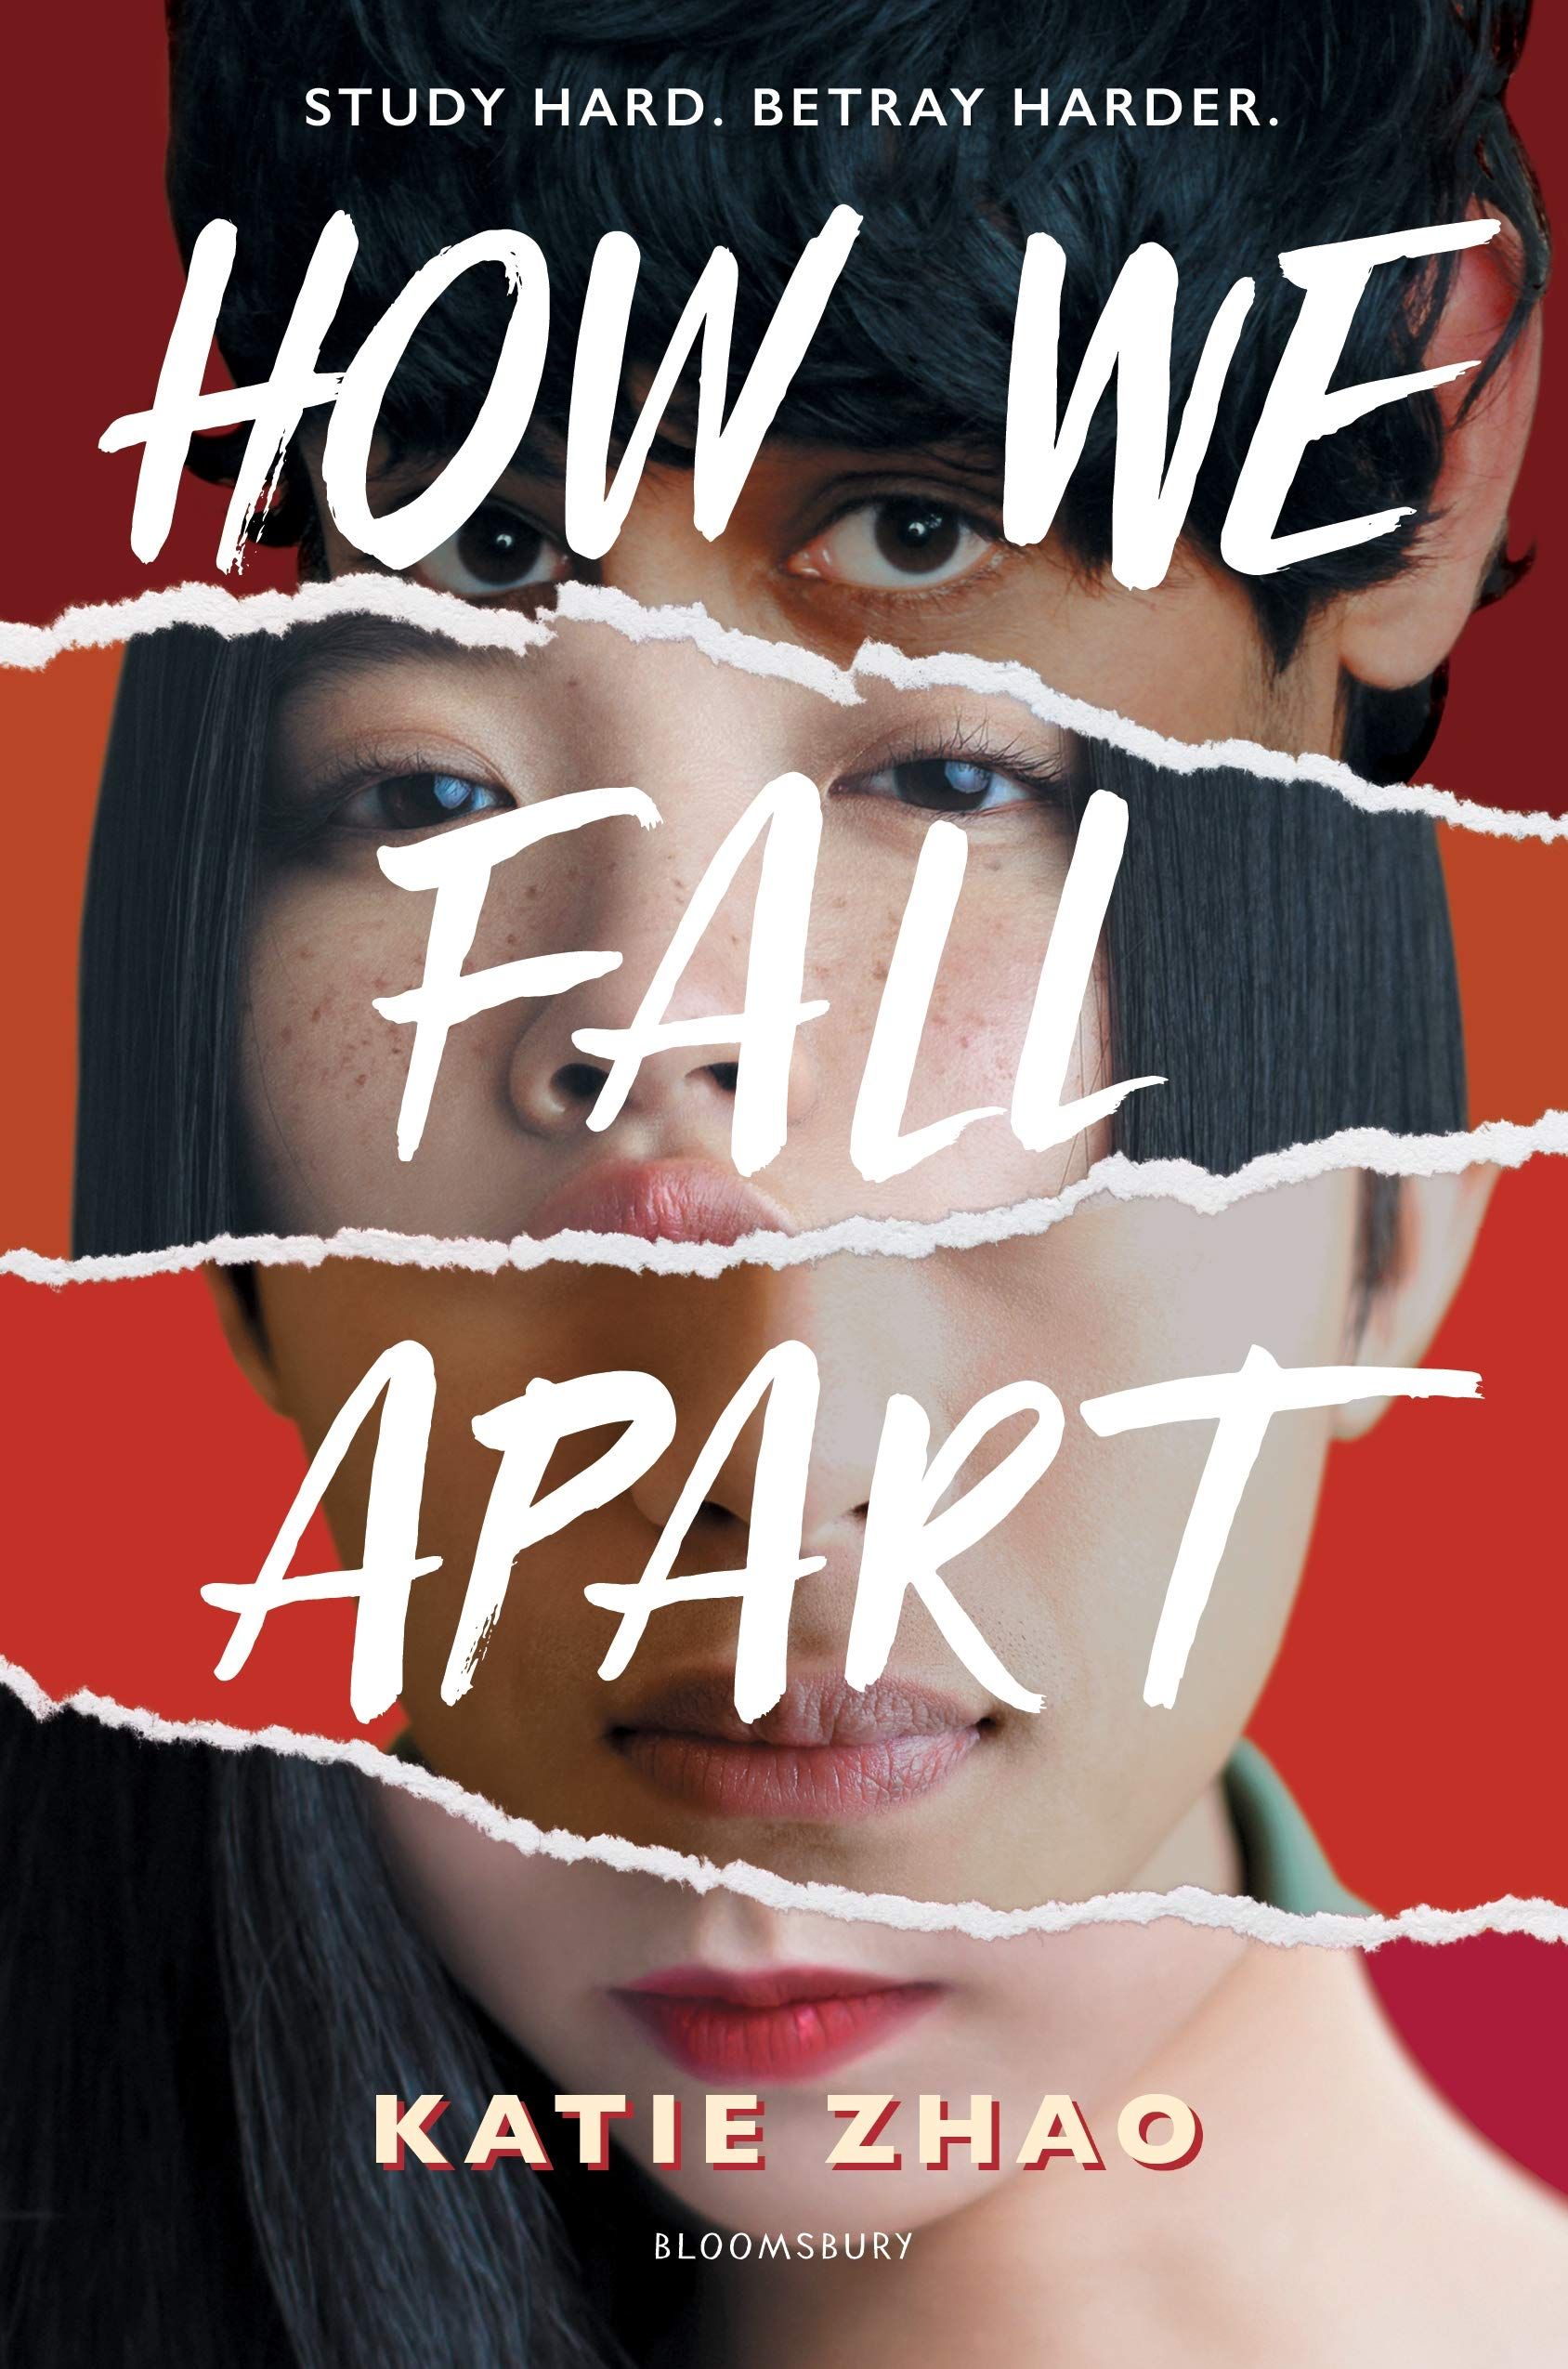 Cover of How we Fall Apart by Katie Zhao